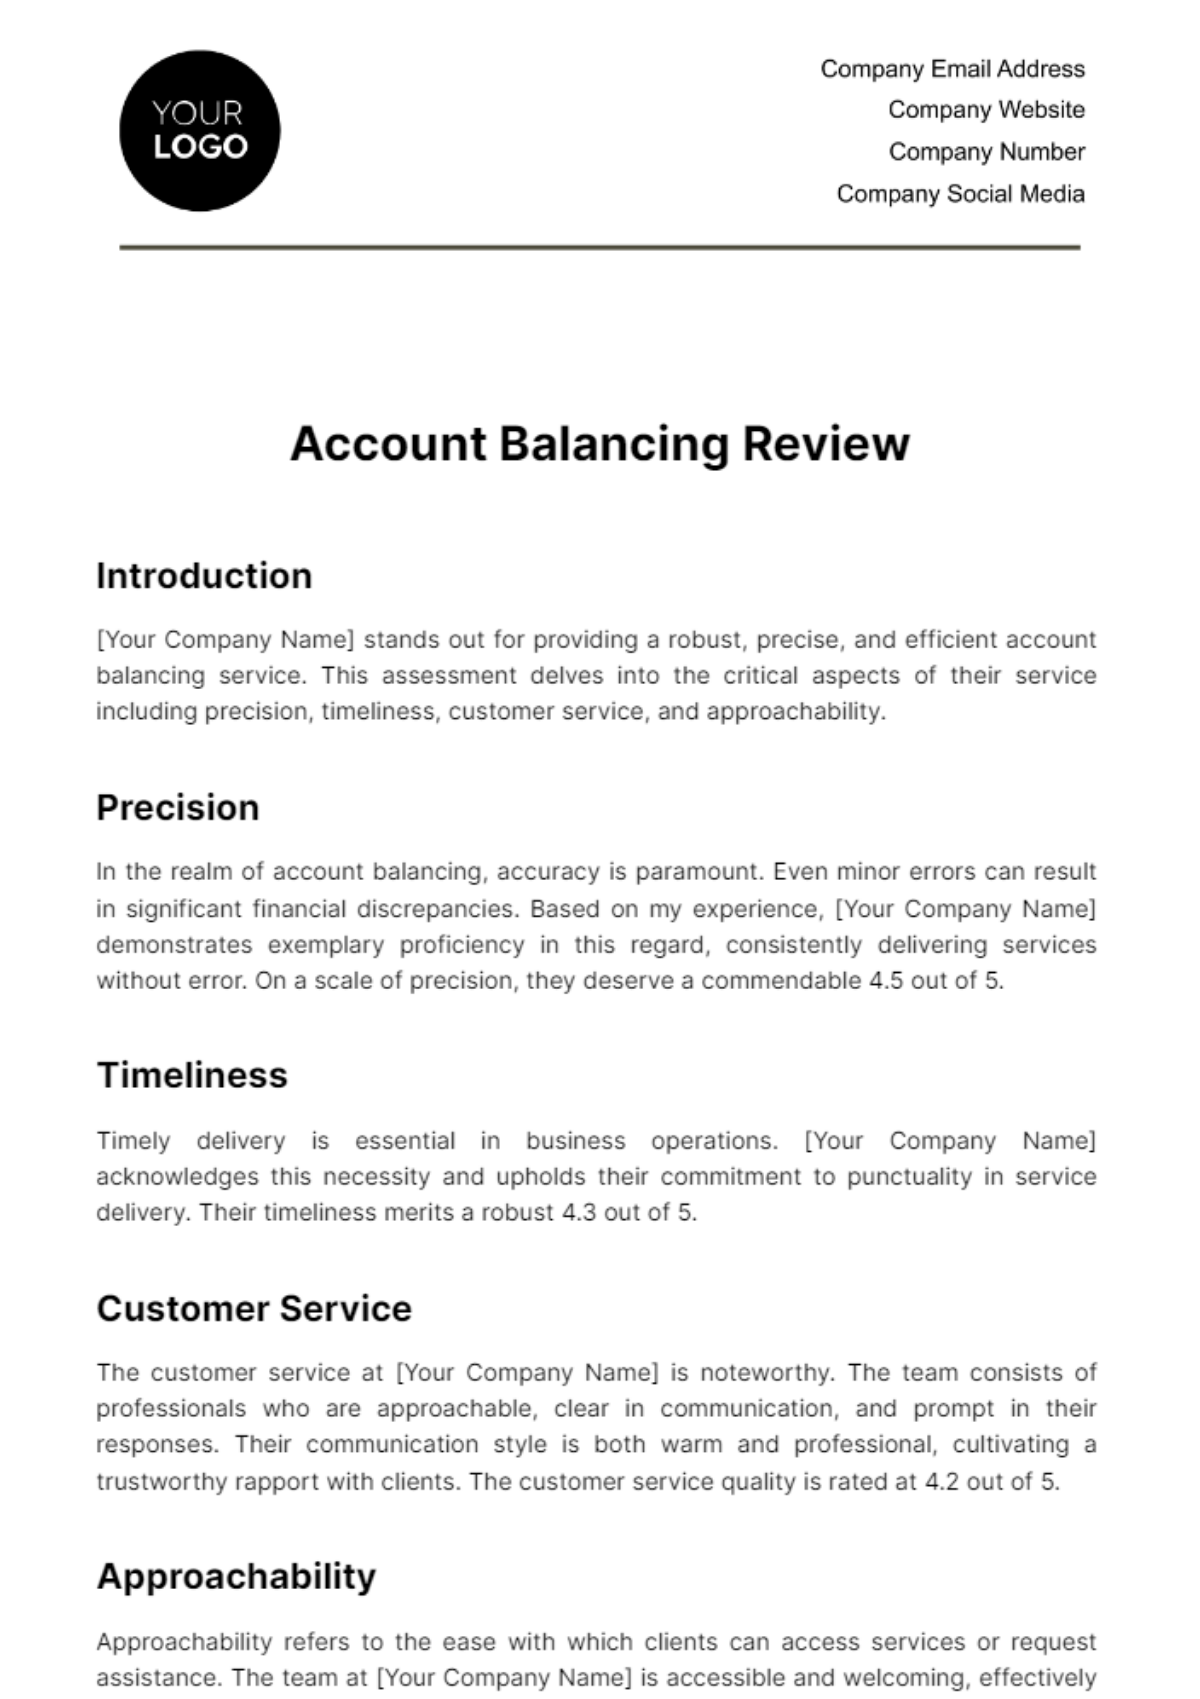 Account Balancing Review Template